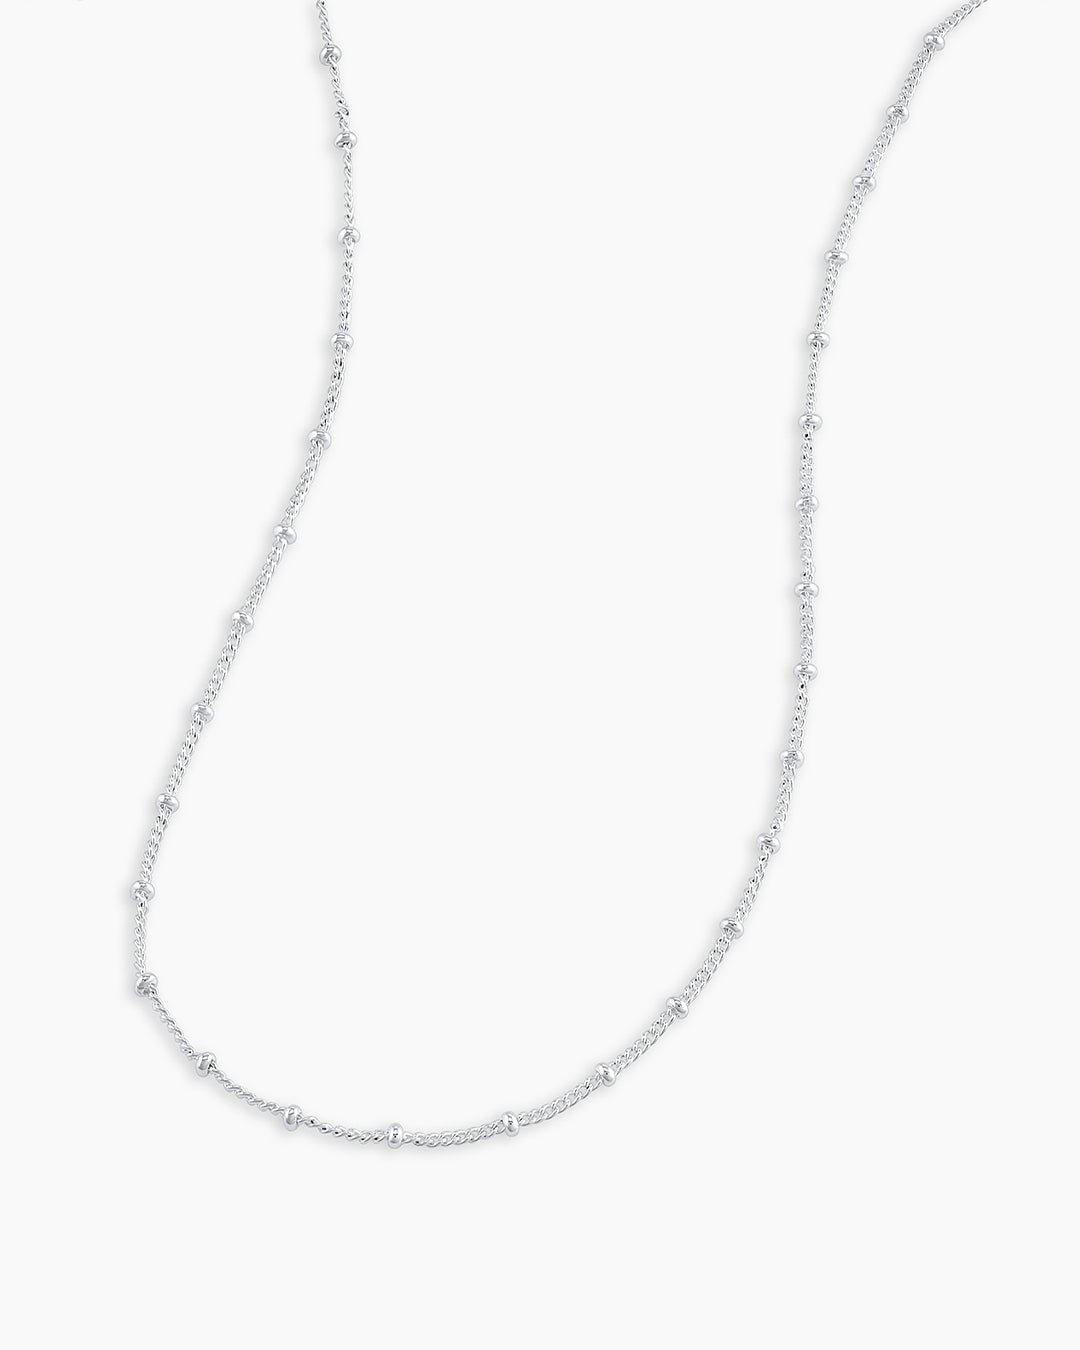 Bali Necklace || option::Silver Plated